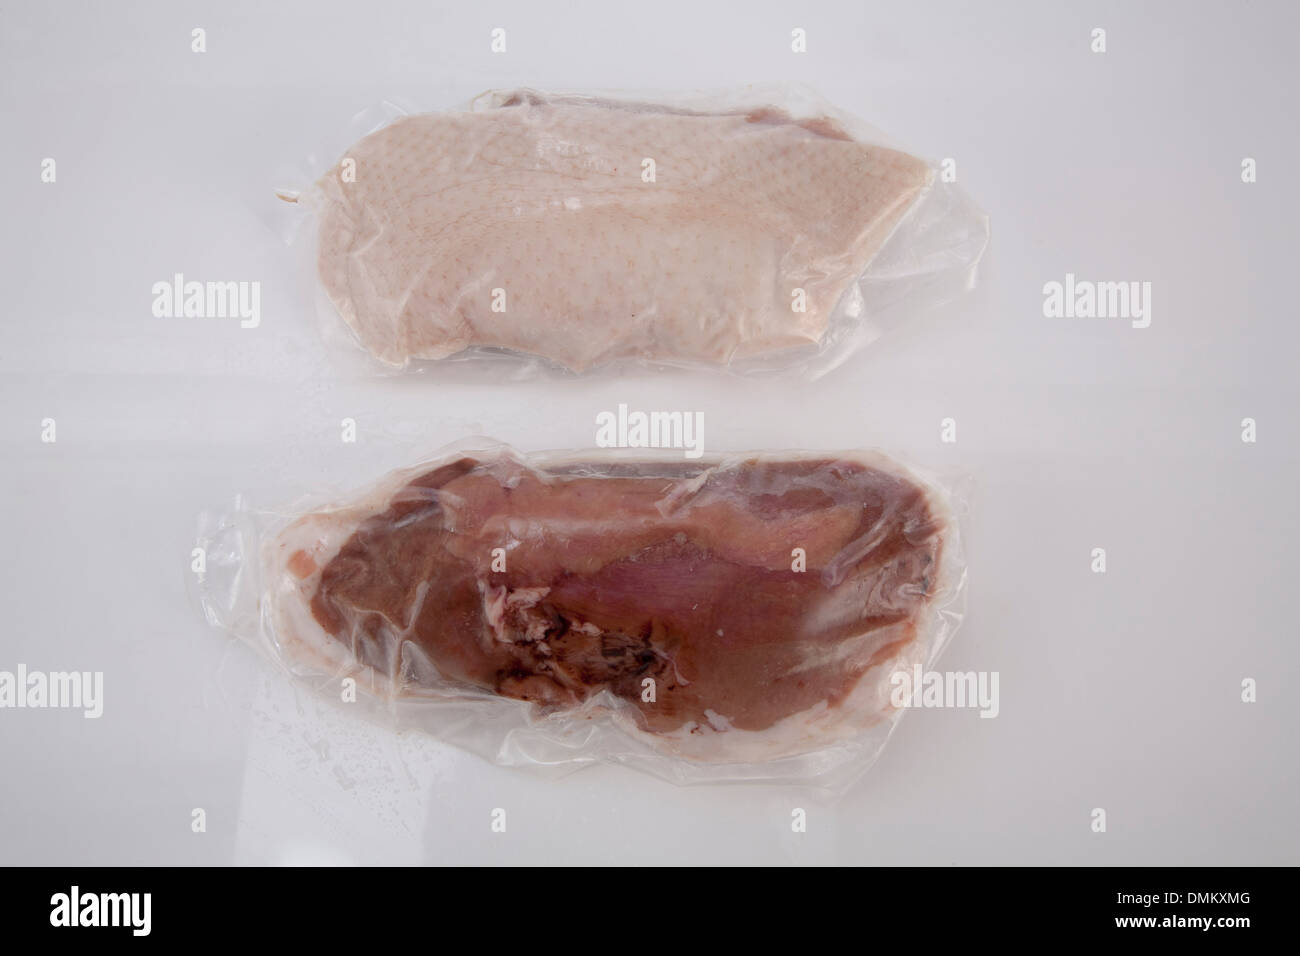 Meat products beef cow pork chicken pieces slice portions frozen presented on ice Stock Photo